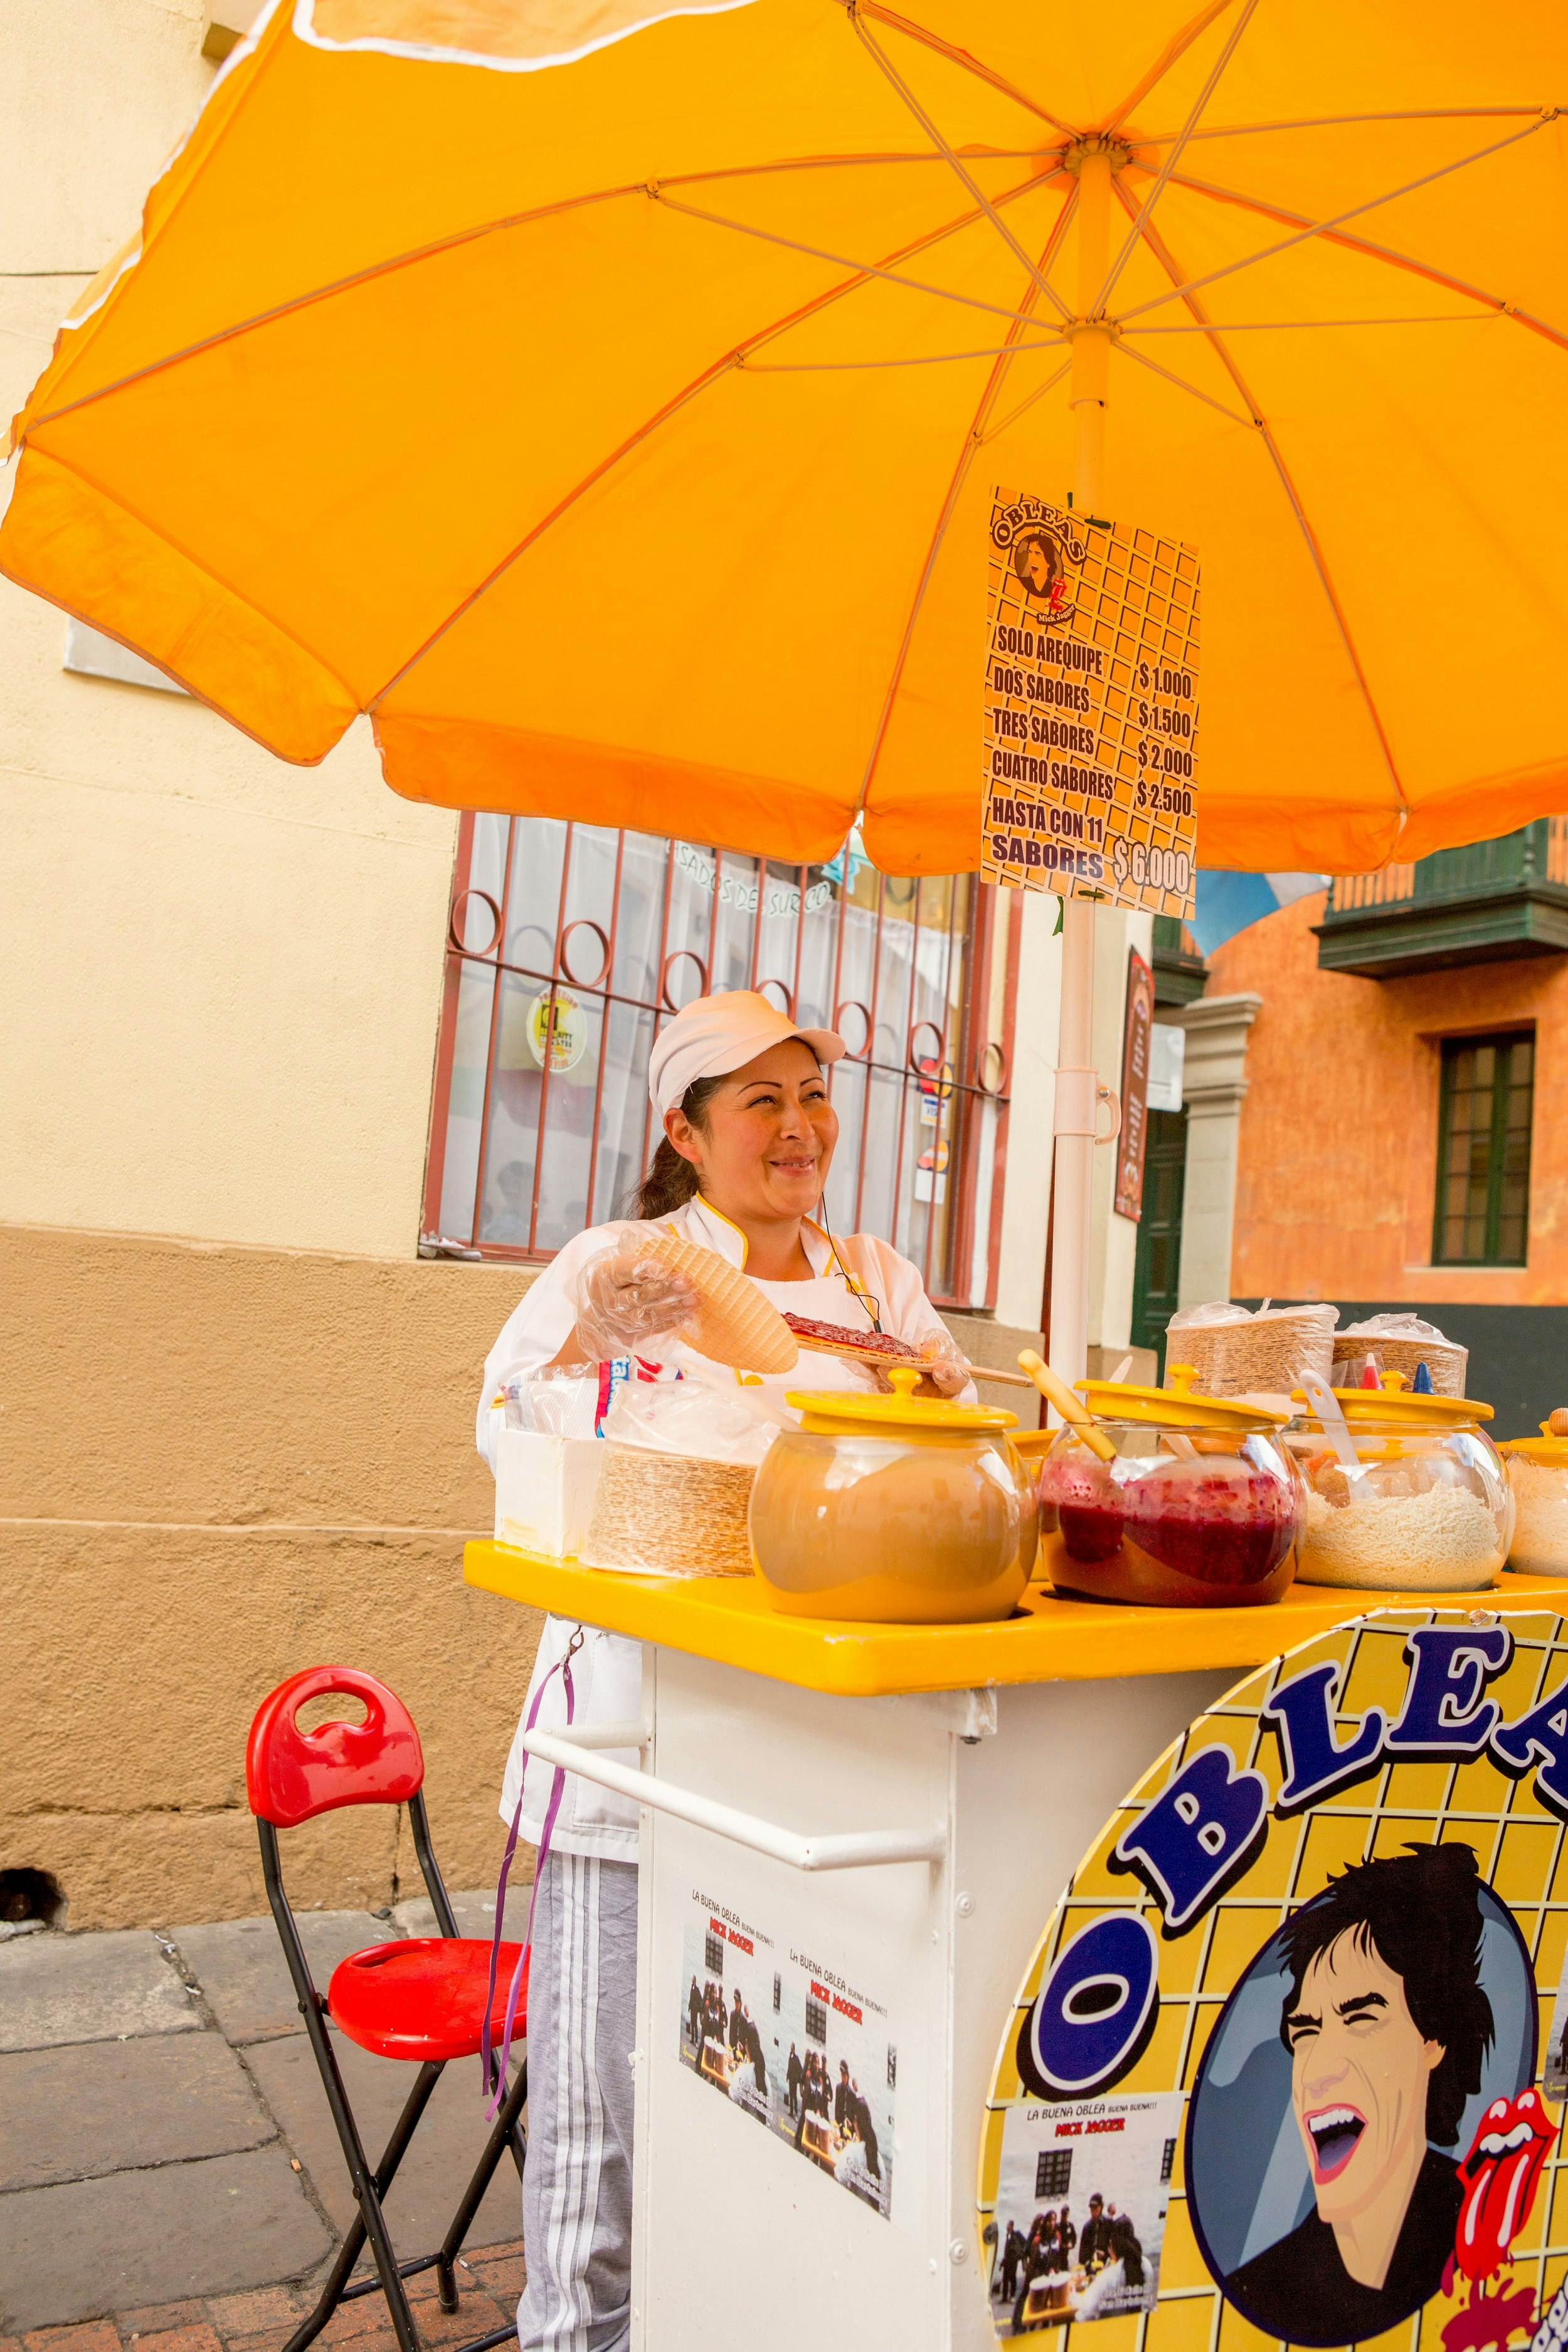 A smiling street vendor stands beneath a bright yellow umbrella that shelters her portable cart where she sells obleos; her sign has a cartoon of Mick Jagger and the Rolling Stones logo.